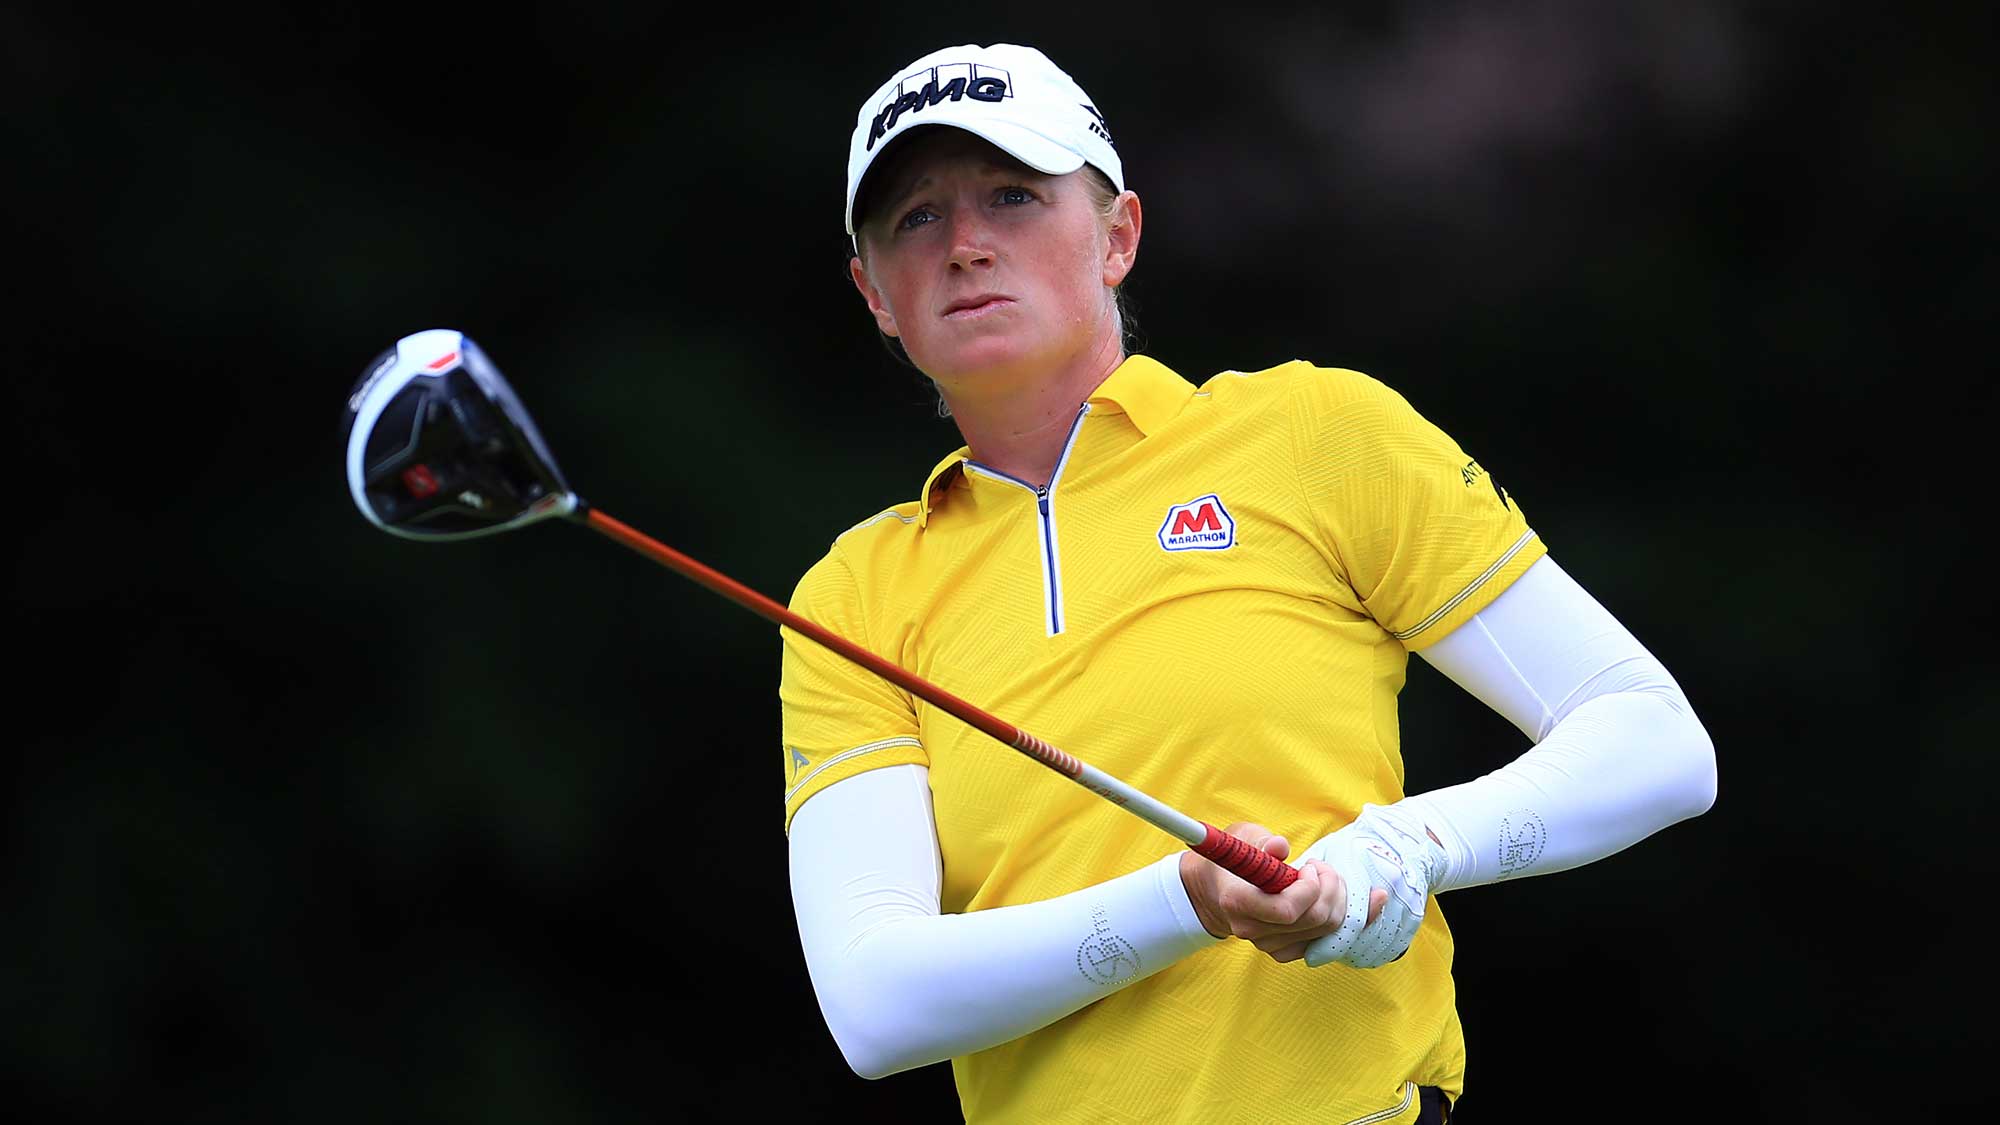 Stacy Lewis of the United States hits her tee shot on the 4th hole during the final round of the Canadian Pacific Women's Open